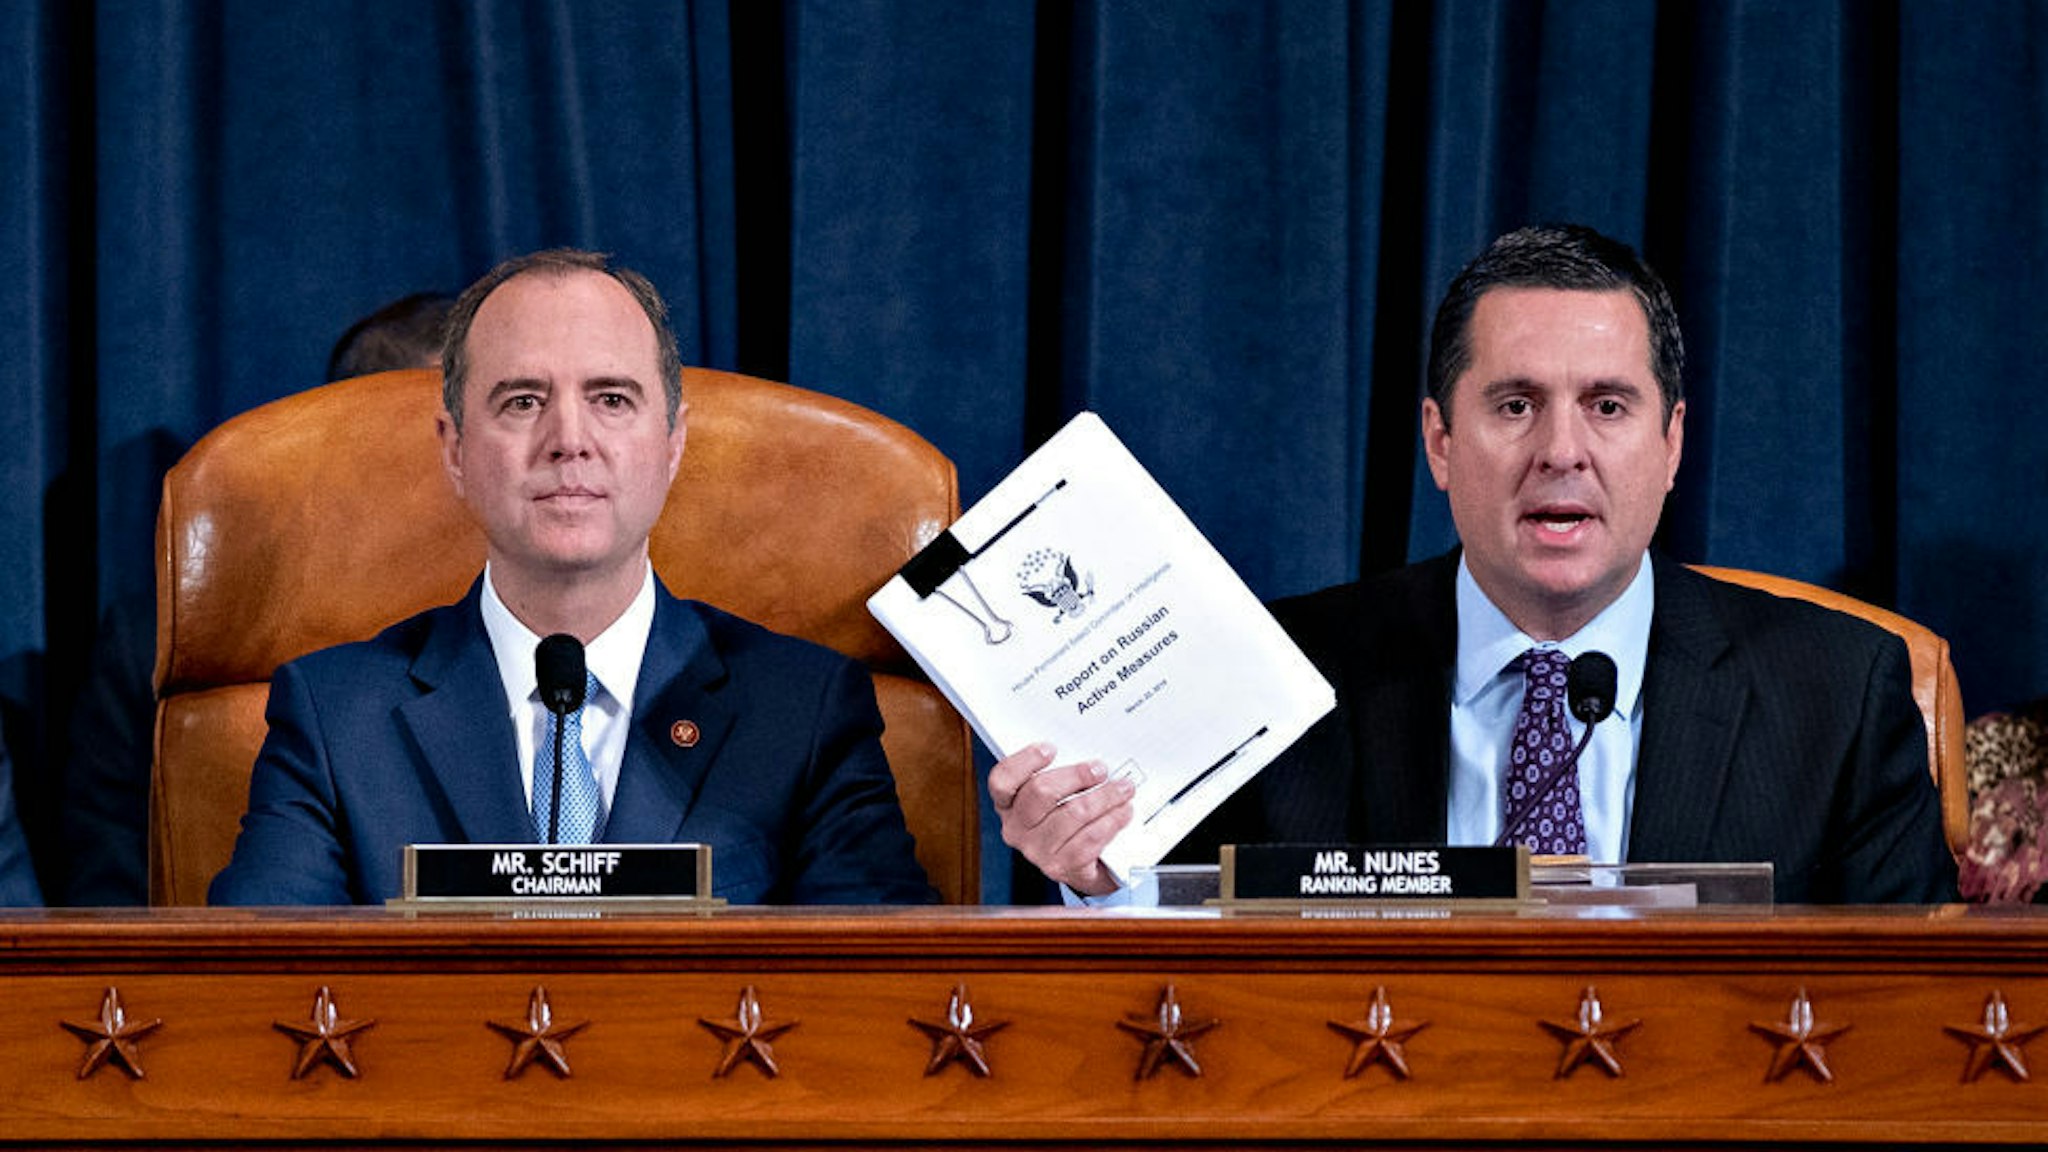 Representative Devin Nunes, a Republican from California and ranking member of the House Intelligence Committee, right, speaks as Representative Adam Schiff, a Democrat from California and chairman of the House Intelligence Committee, listens during an impeachment inquiry hearingon Capitol Hill November 21, 2019 in Washington, DC. The committee heard testimony during the fifth day of open hearings in the impeachment inquiry against U.S. President Donald Trump, whom House Democrats say held back U.S. military aid for Ukraine while demanding it investigate his political rivals. (Photo by Andrew Harrer-Pool/Getty Images)